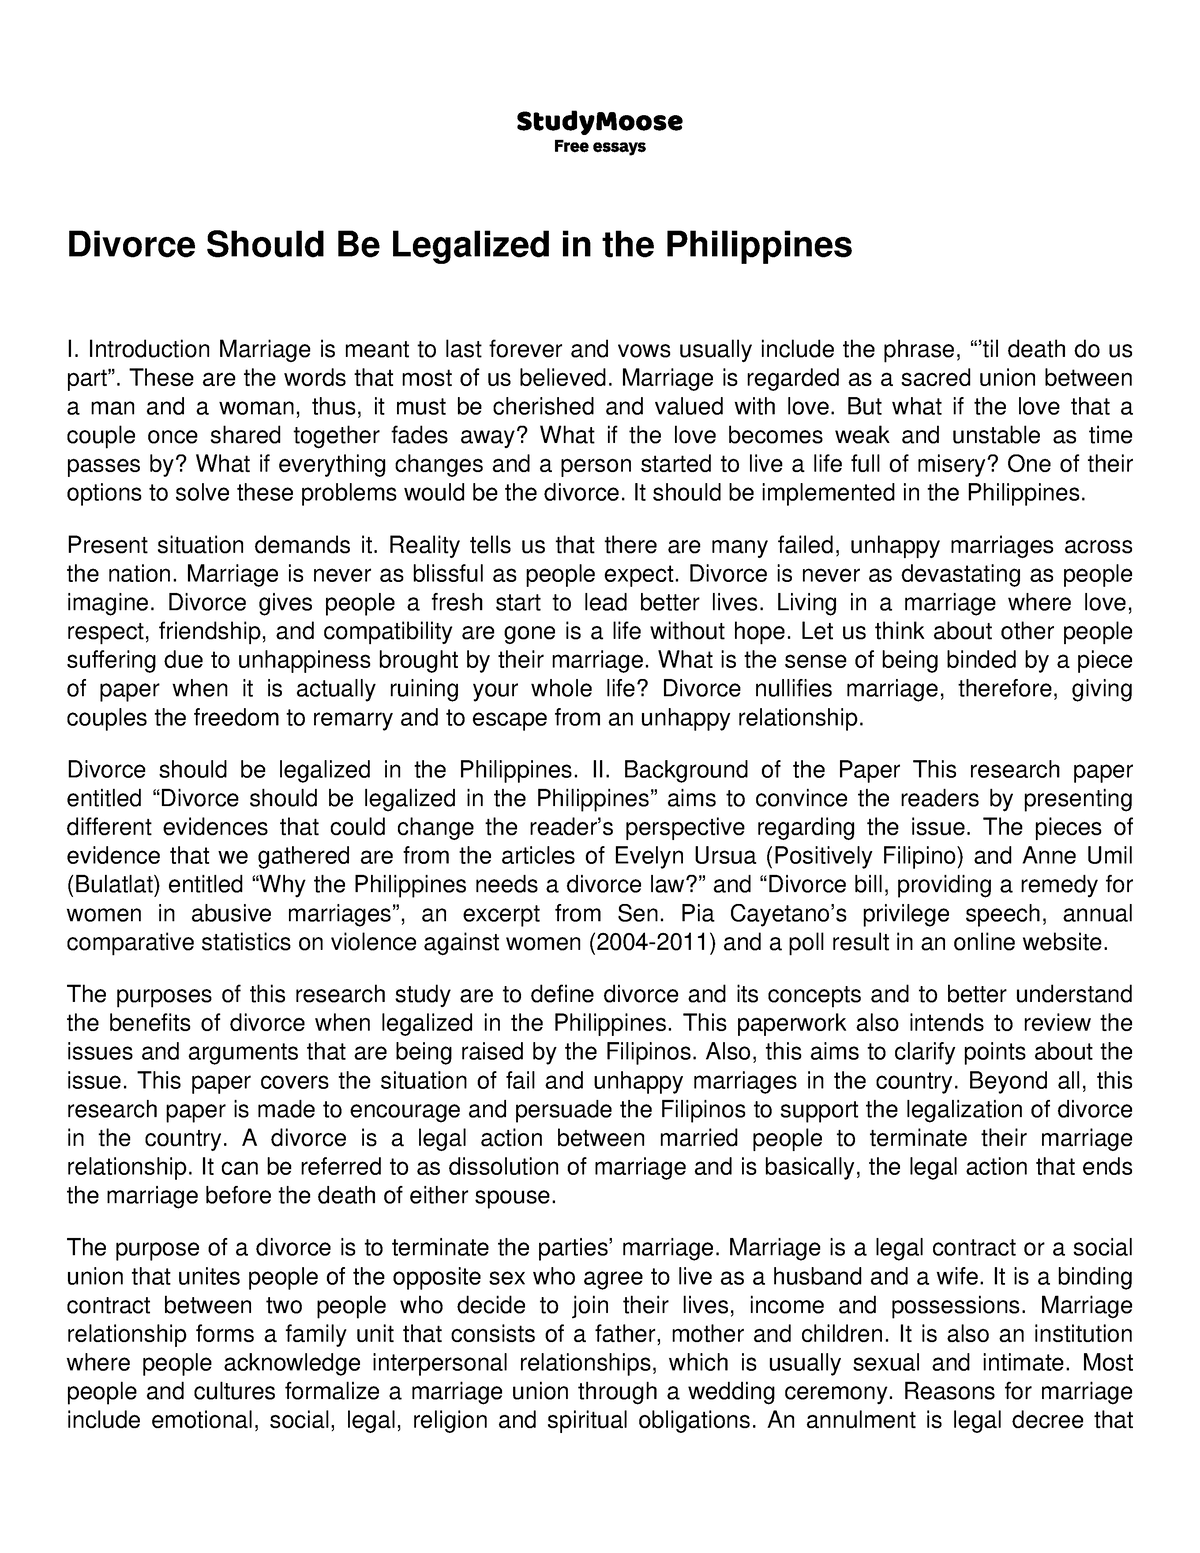 should divorce be legalized in the philippines essay brainly